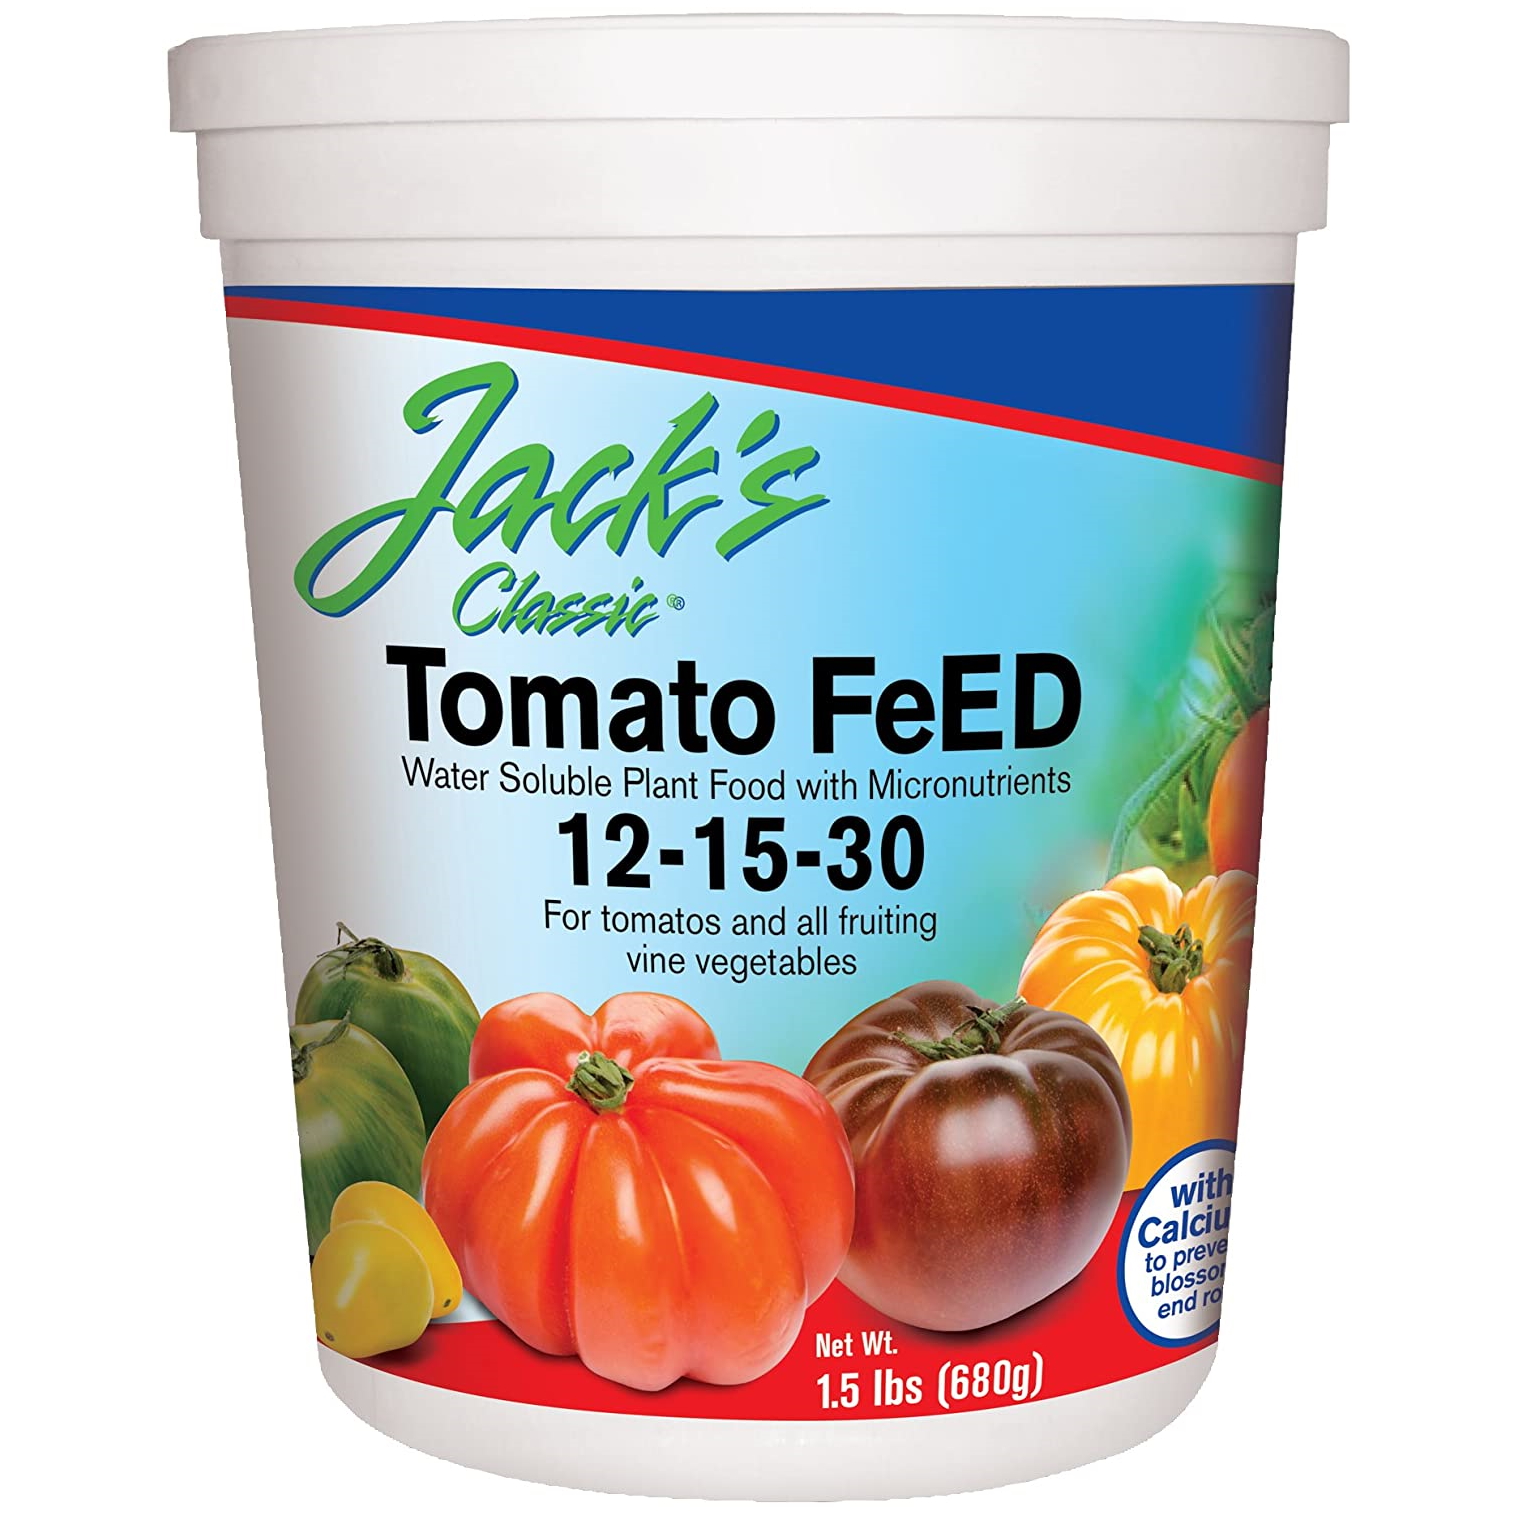 JR Peters Jack's Classic Tomato FeED